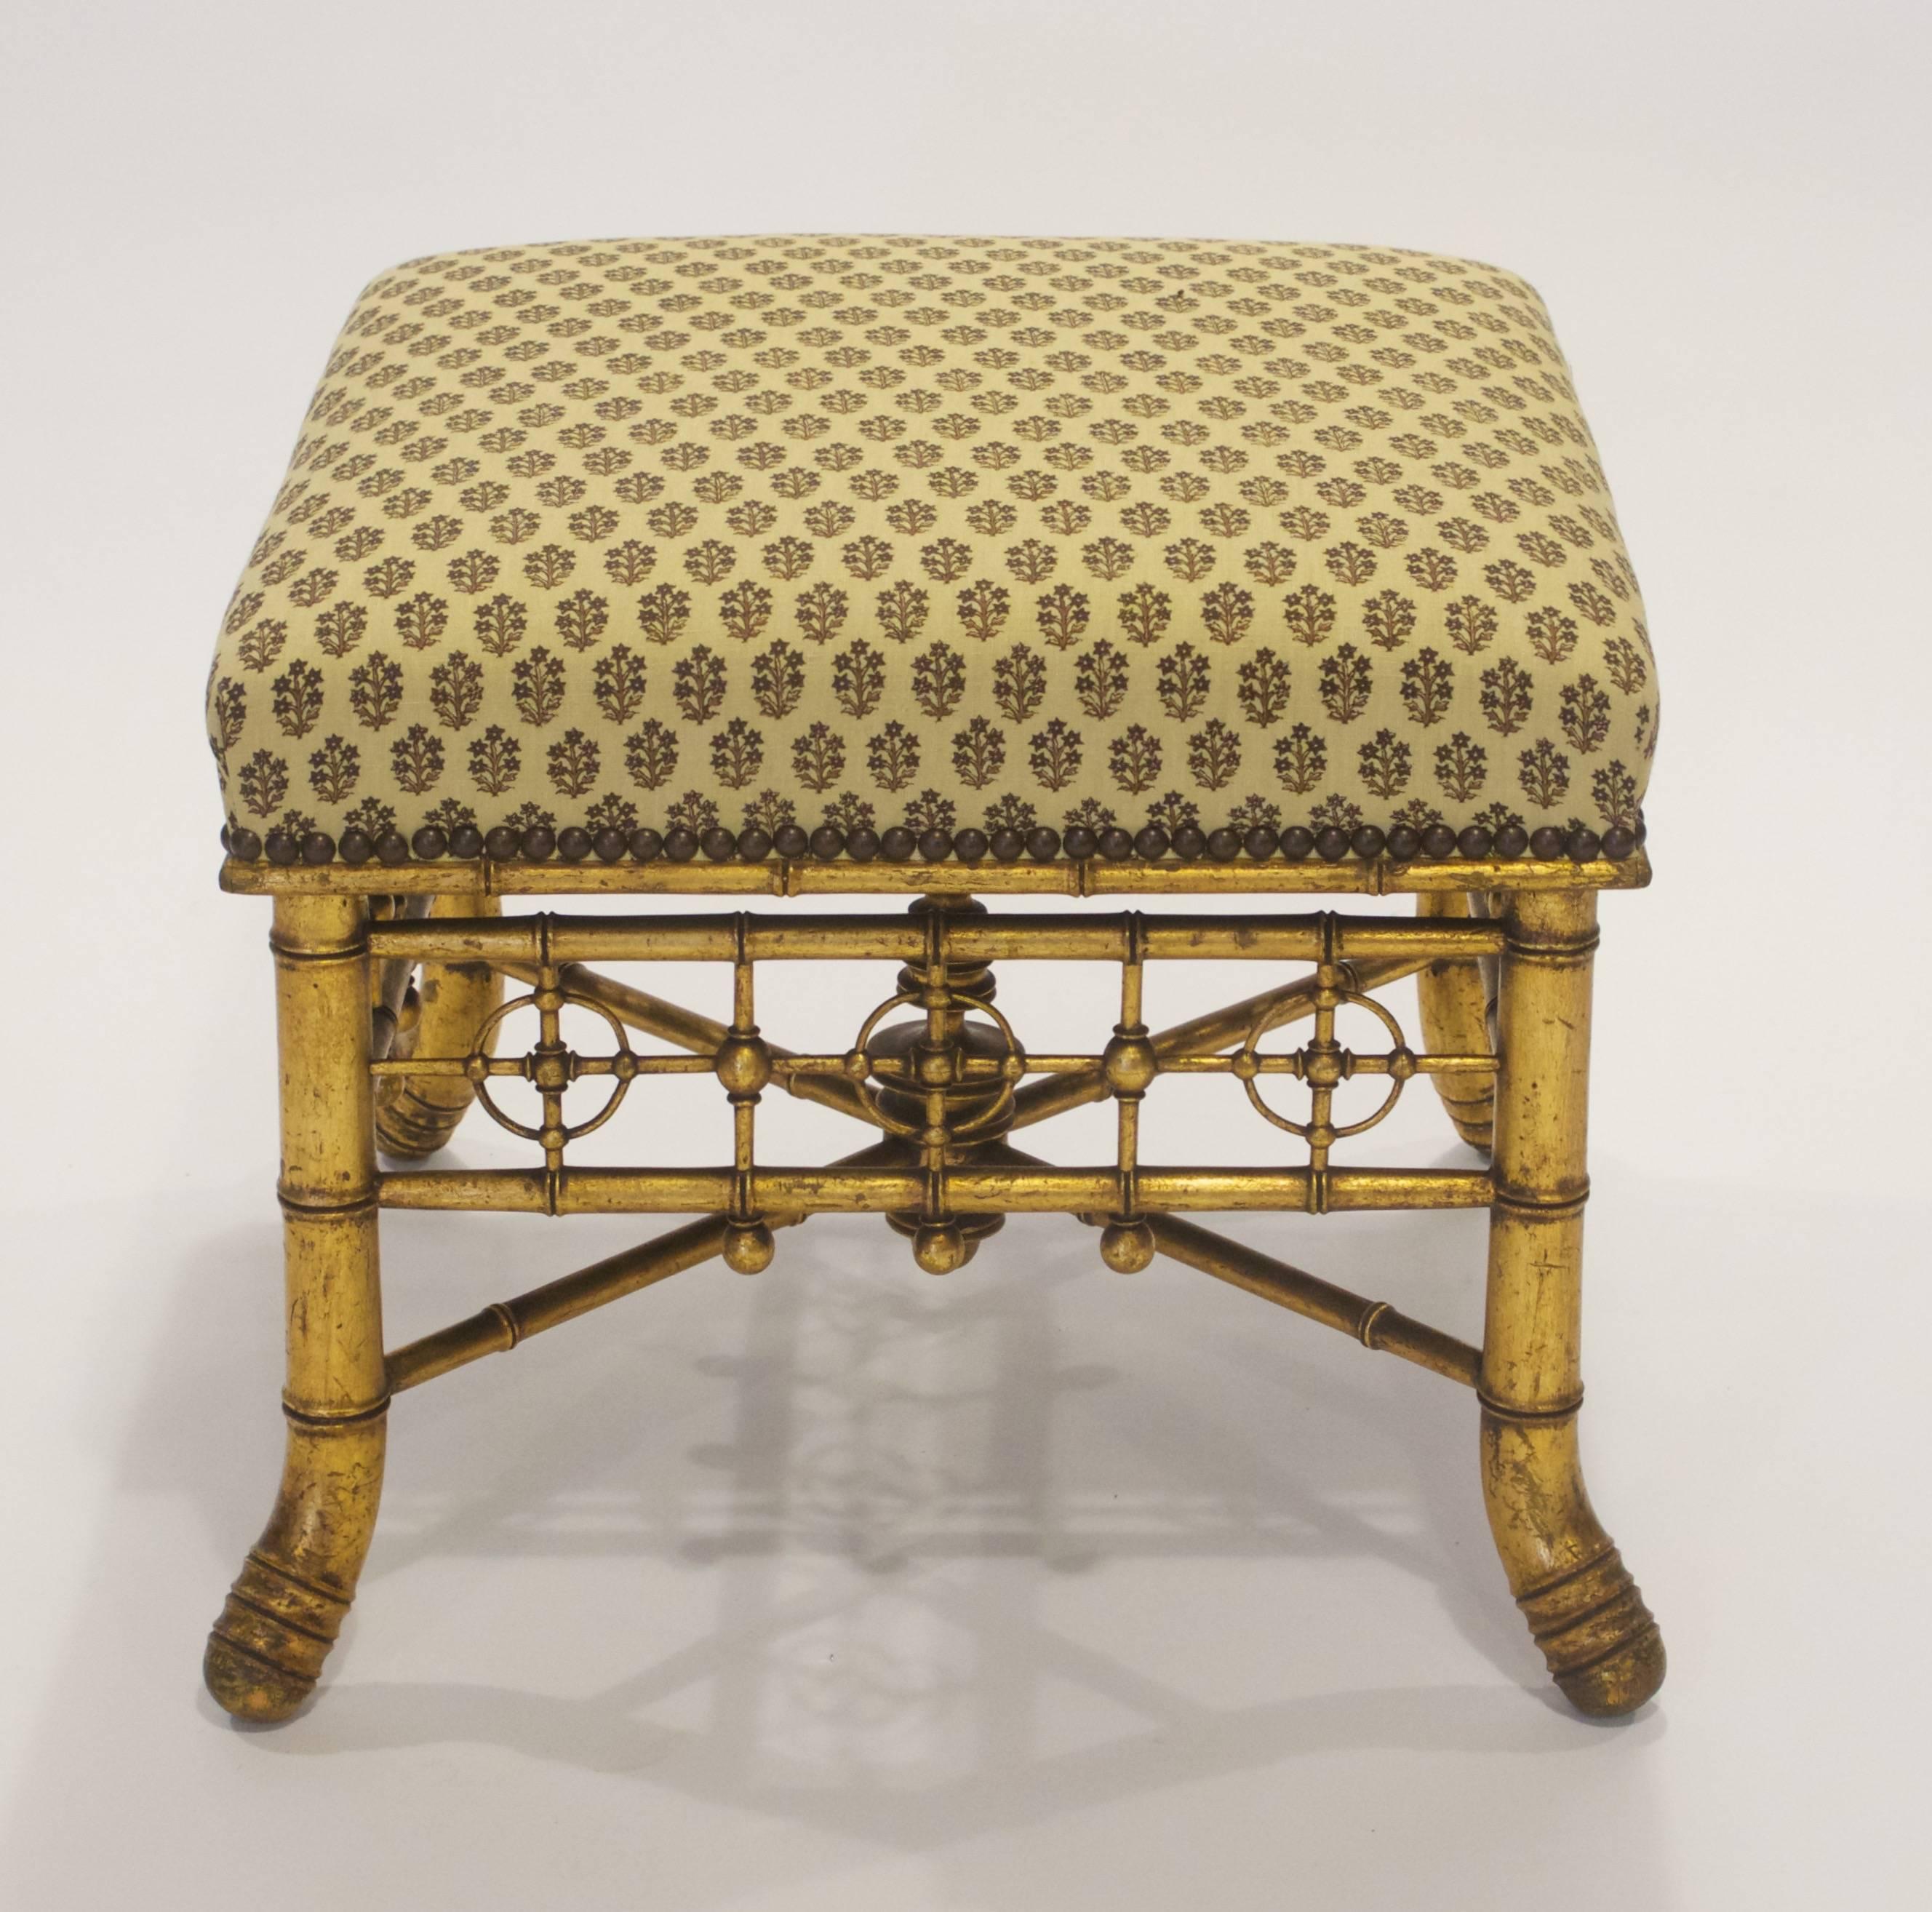 This French Napoleon III period stool has a square upholstered top above carved and gilded wooden apron, legs and stretcher, all resembling bamboo.